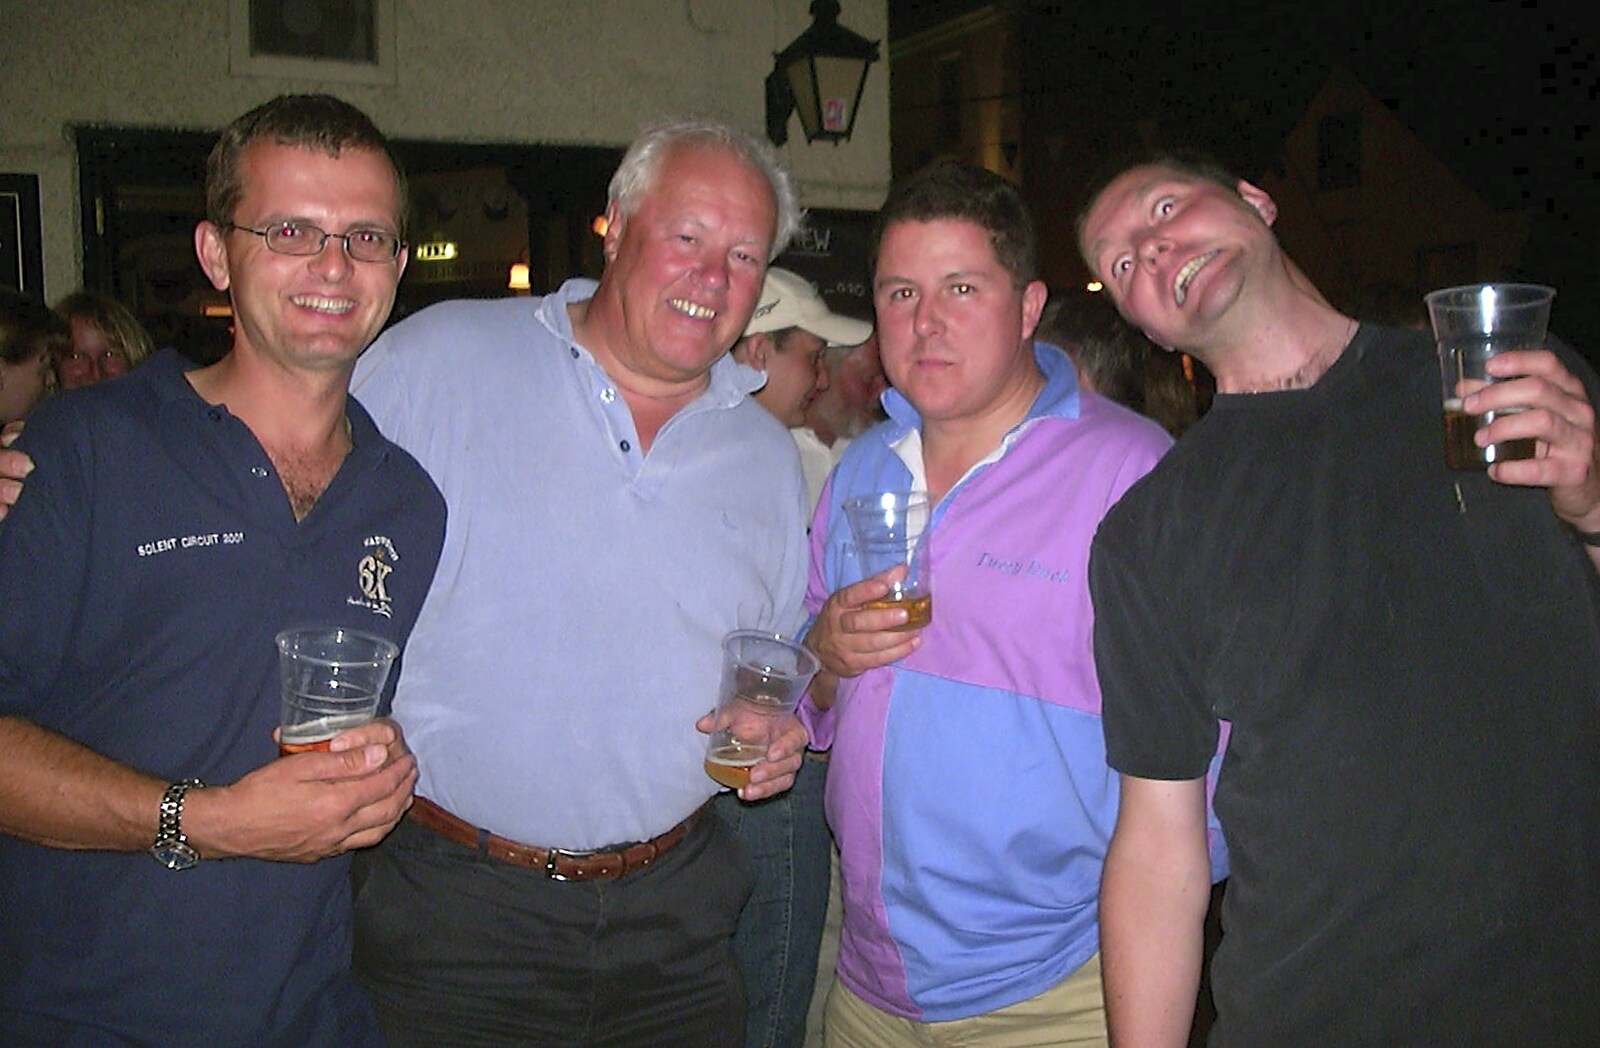 Ray and Crew, with Sean gurning on the right from Cowes Weekend, Cowes, Isle of Wight - 7th August 2004